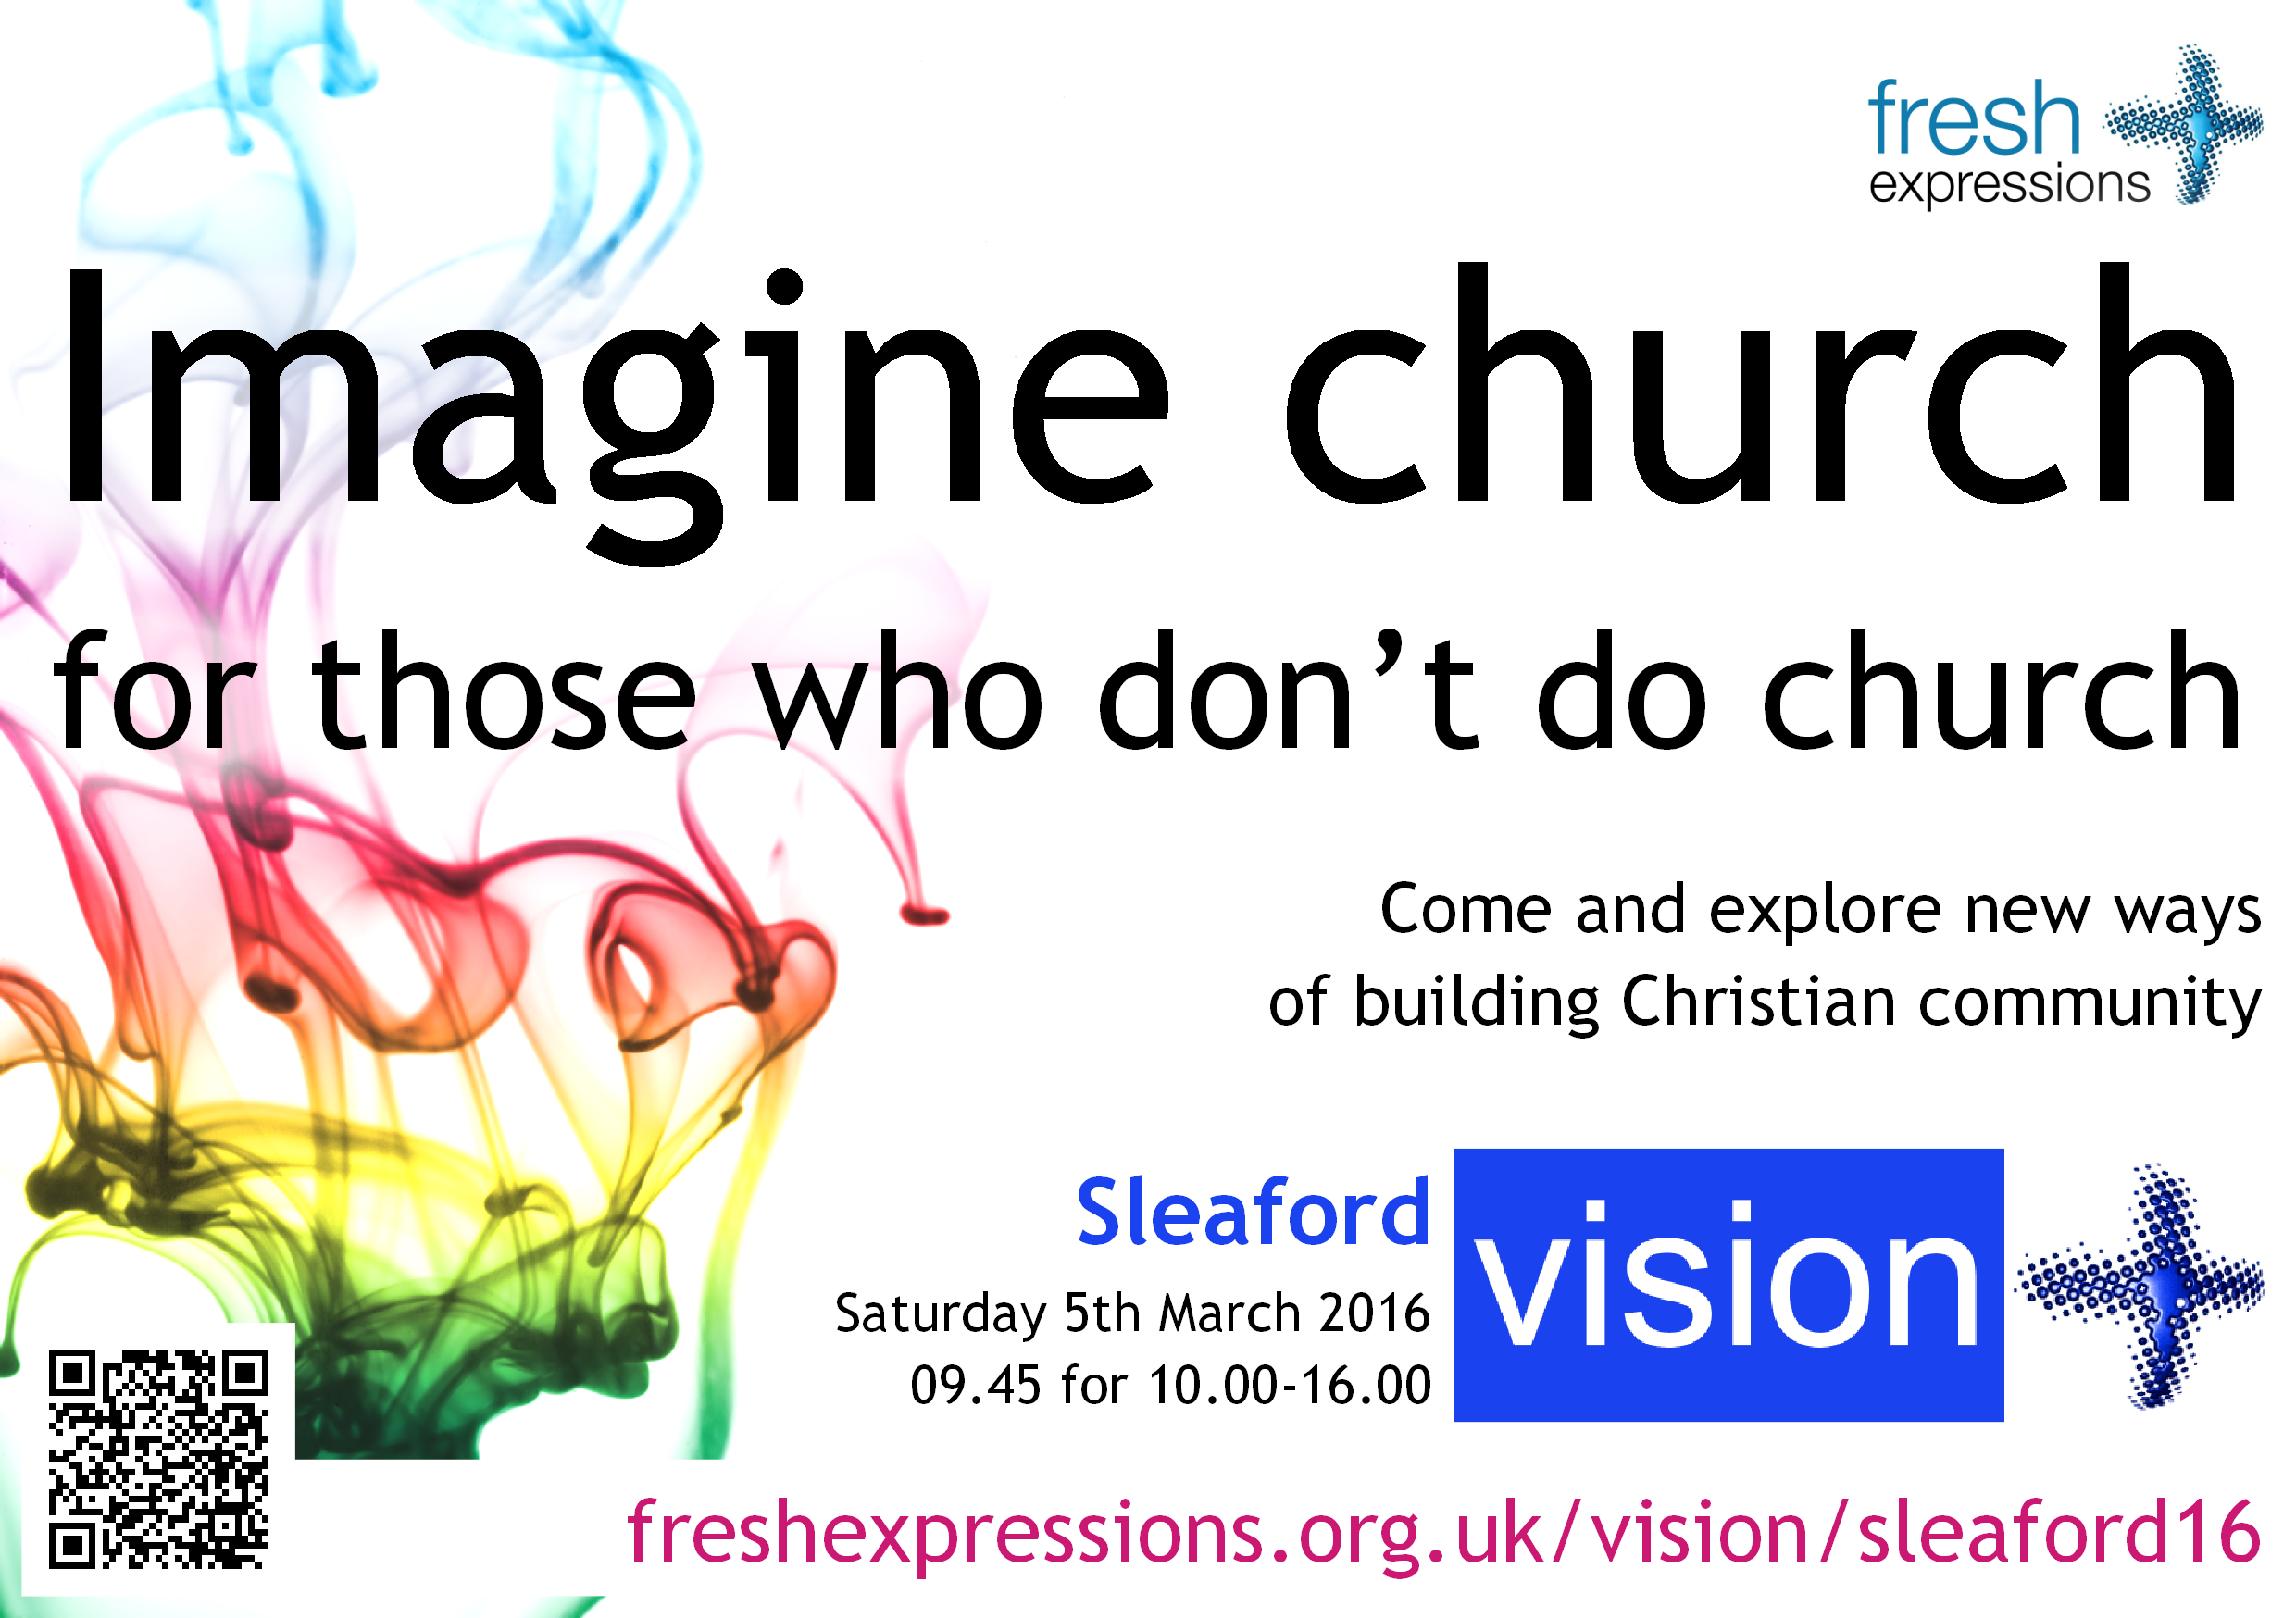 Sleaford vision day